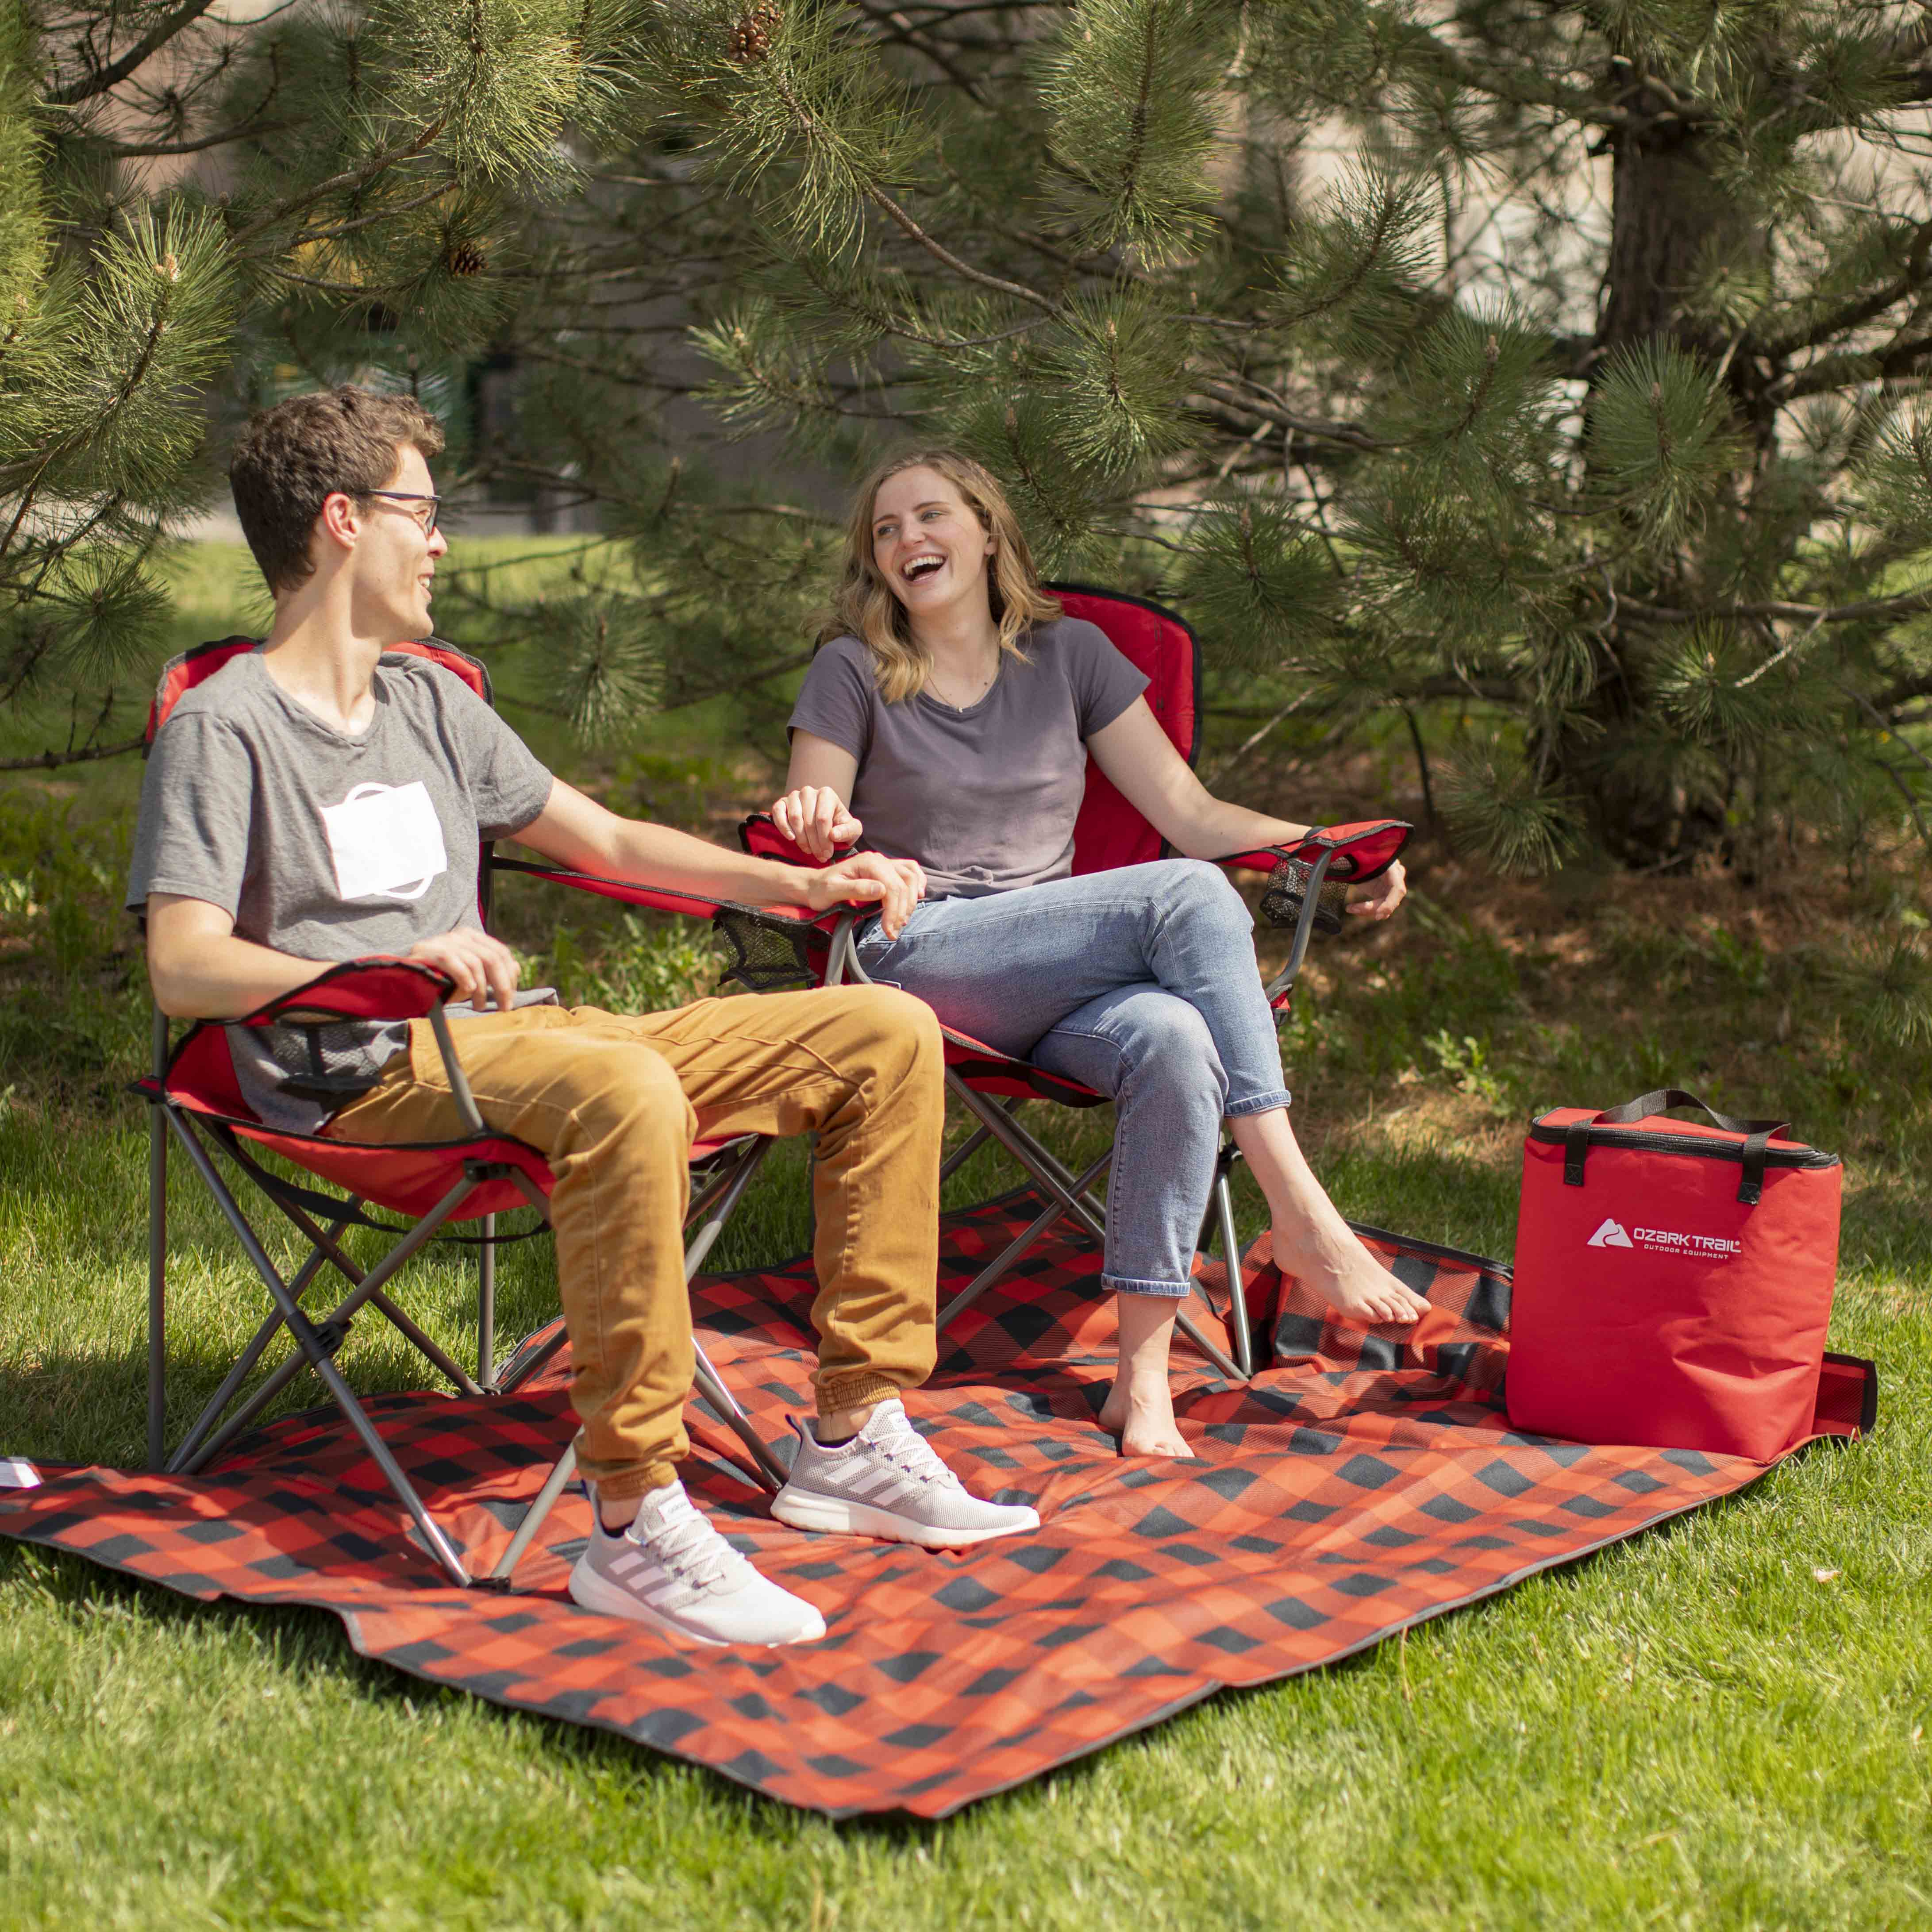 Ozark Trail Mini Tailgate Combo with Footprint, Cooler, and Chairs - image 5 of 5